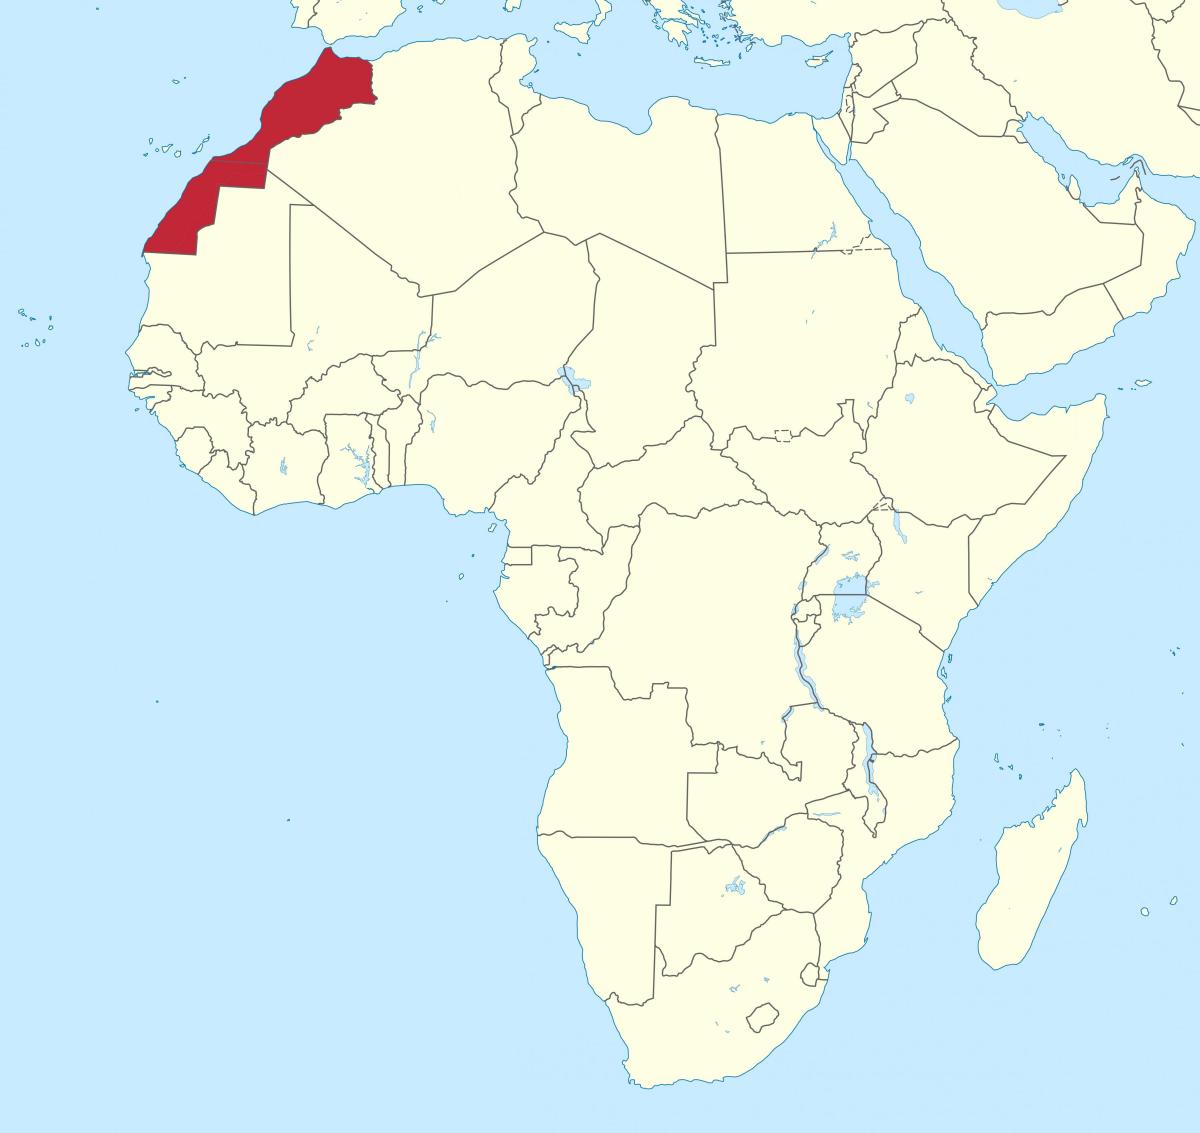 Morocco location on the Africa map